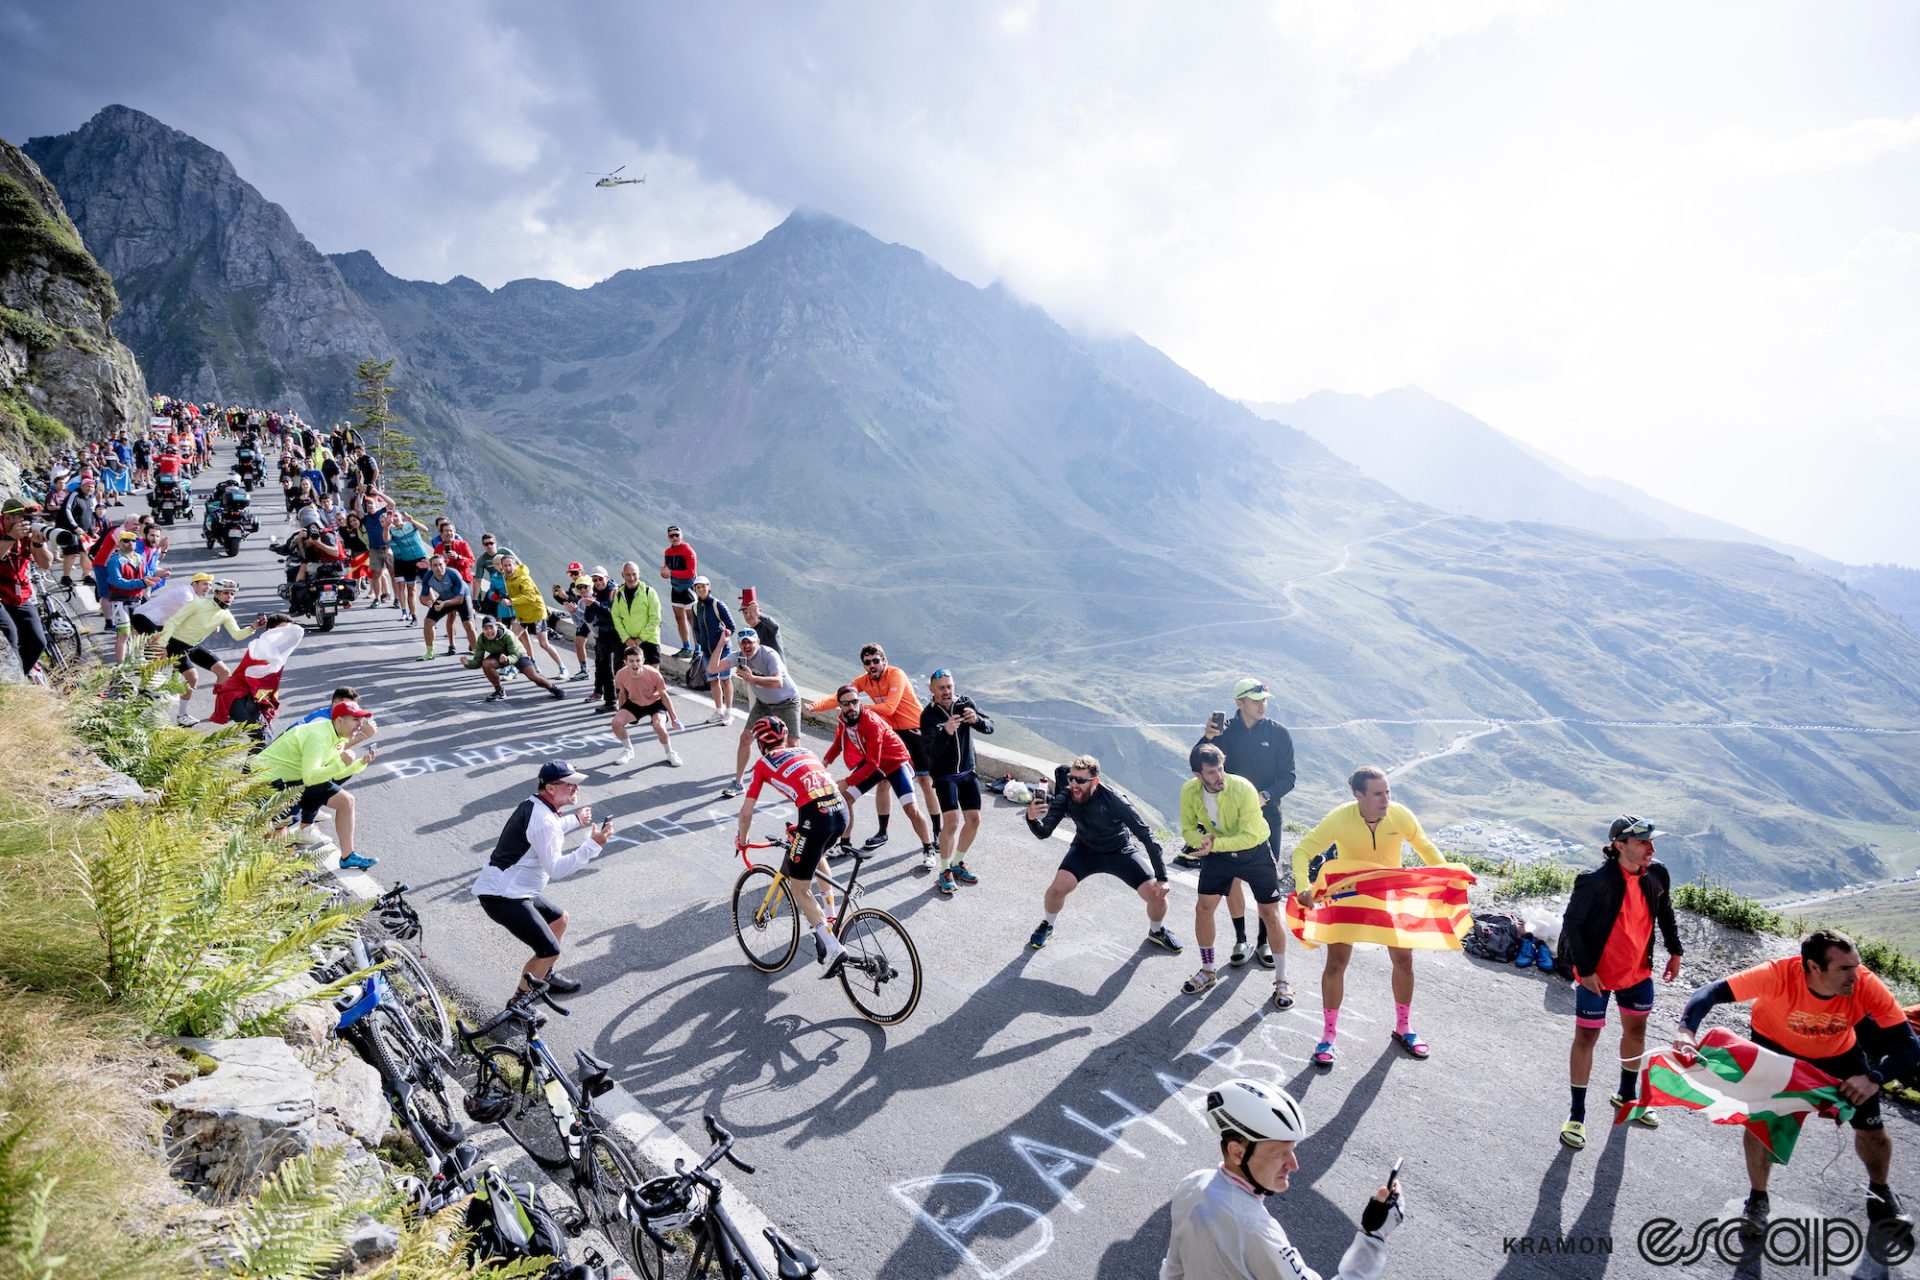 Sepp Kuss climbs the Col du Tourmalet alone in pursuit of Jonas Vingegaard. The road is lined with fans, some waving Basque and Spanish flags, and behind the Pyrenees loom in misty backlit light as a helicopter flies in the distance.